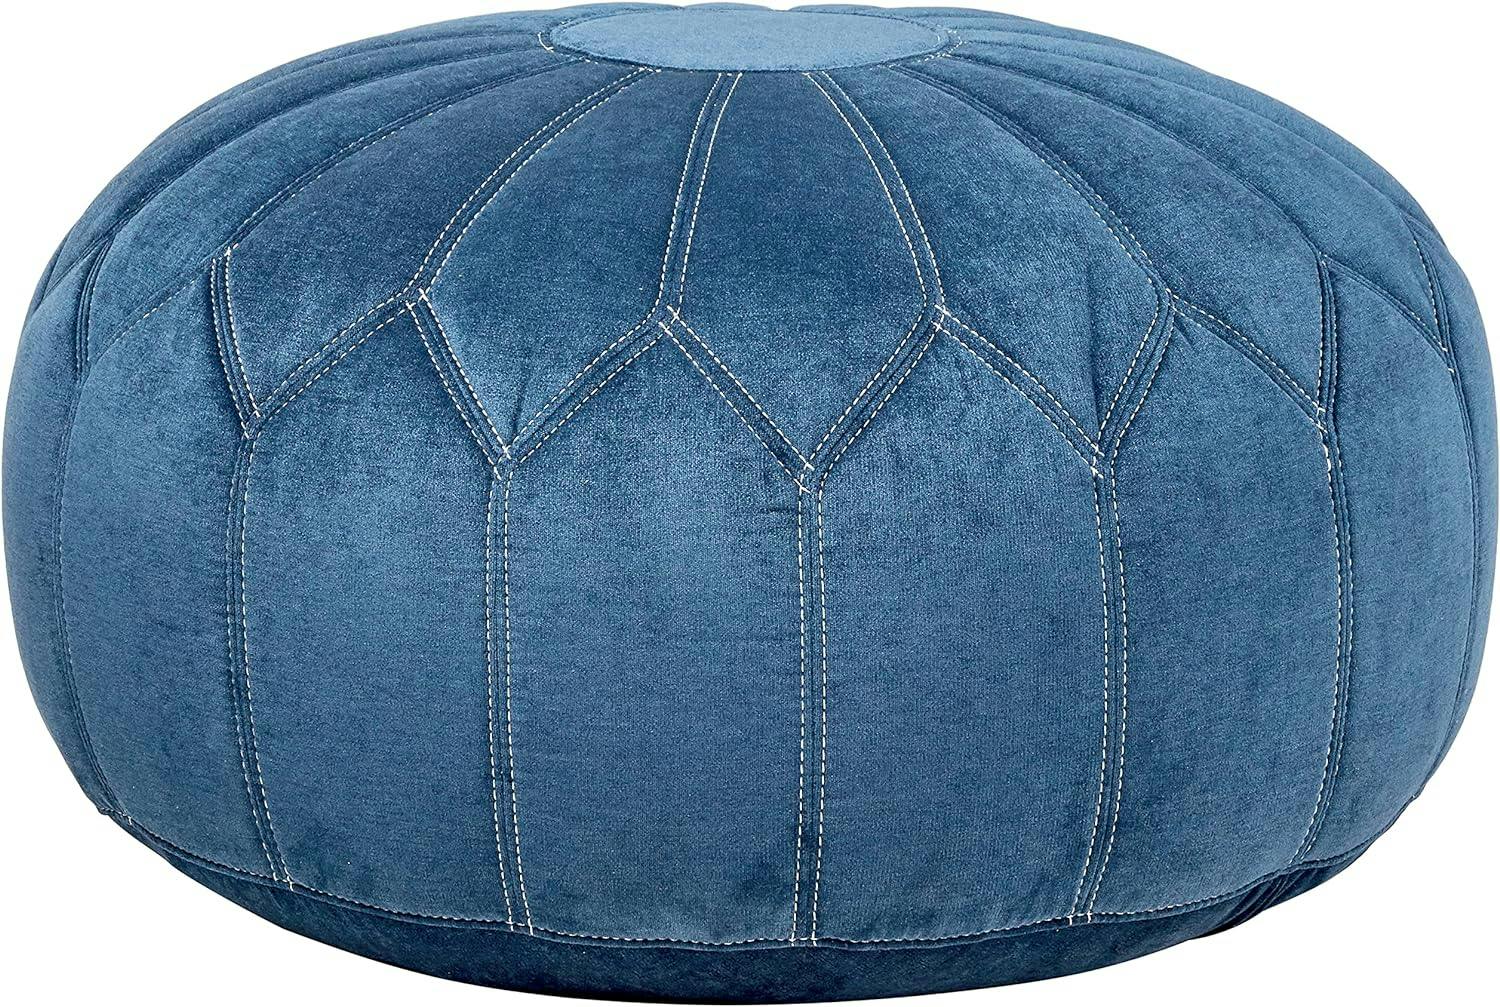 Kelsey Sophisticated Round Pouf Ottoman in Soft Brown